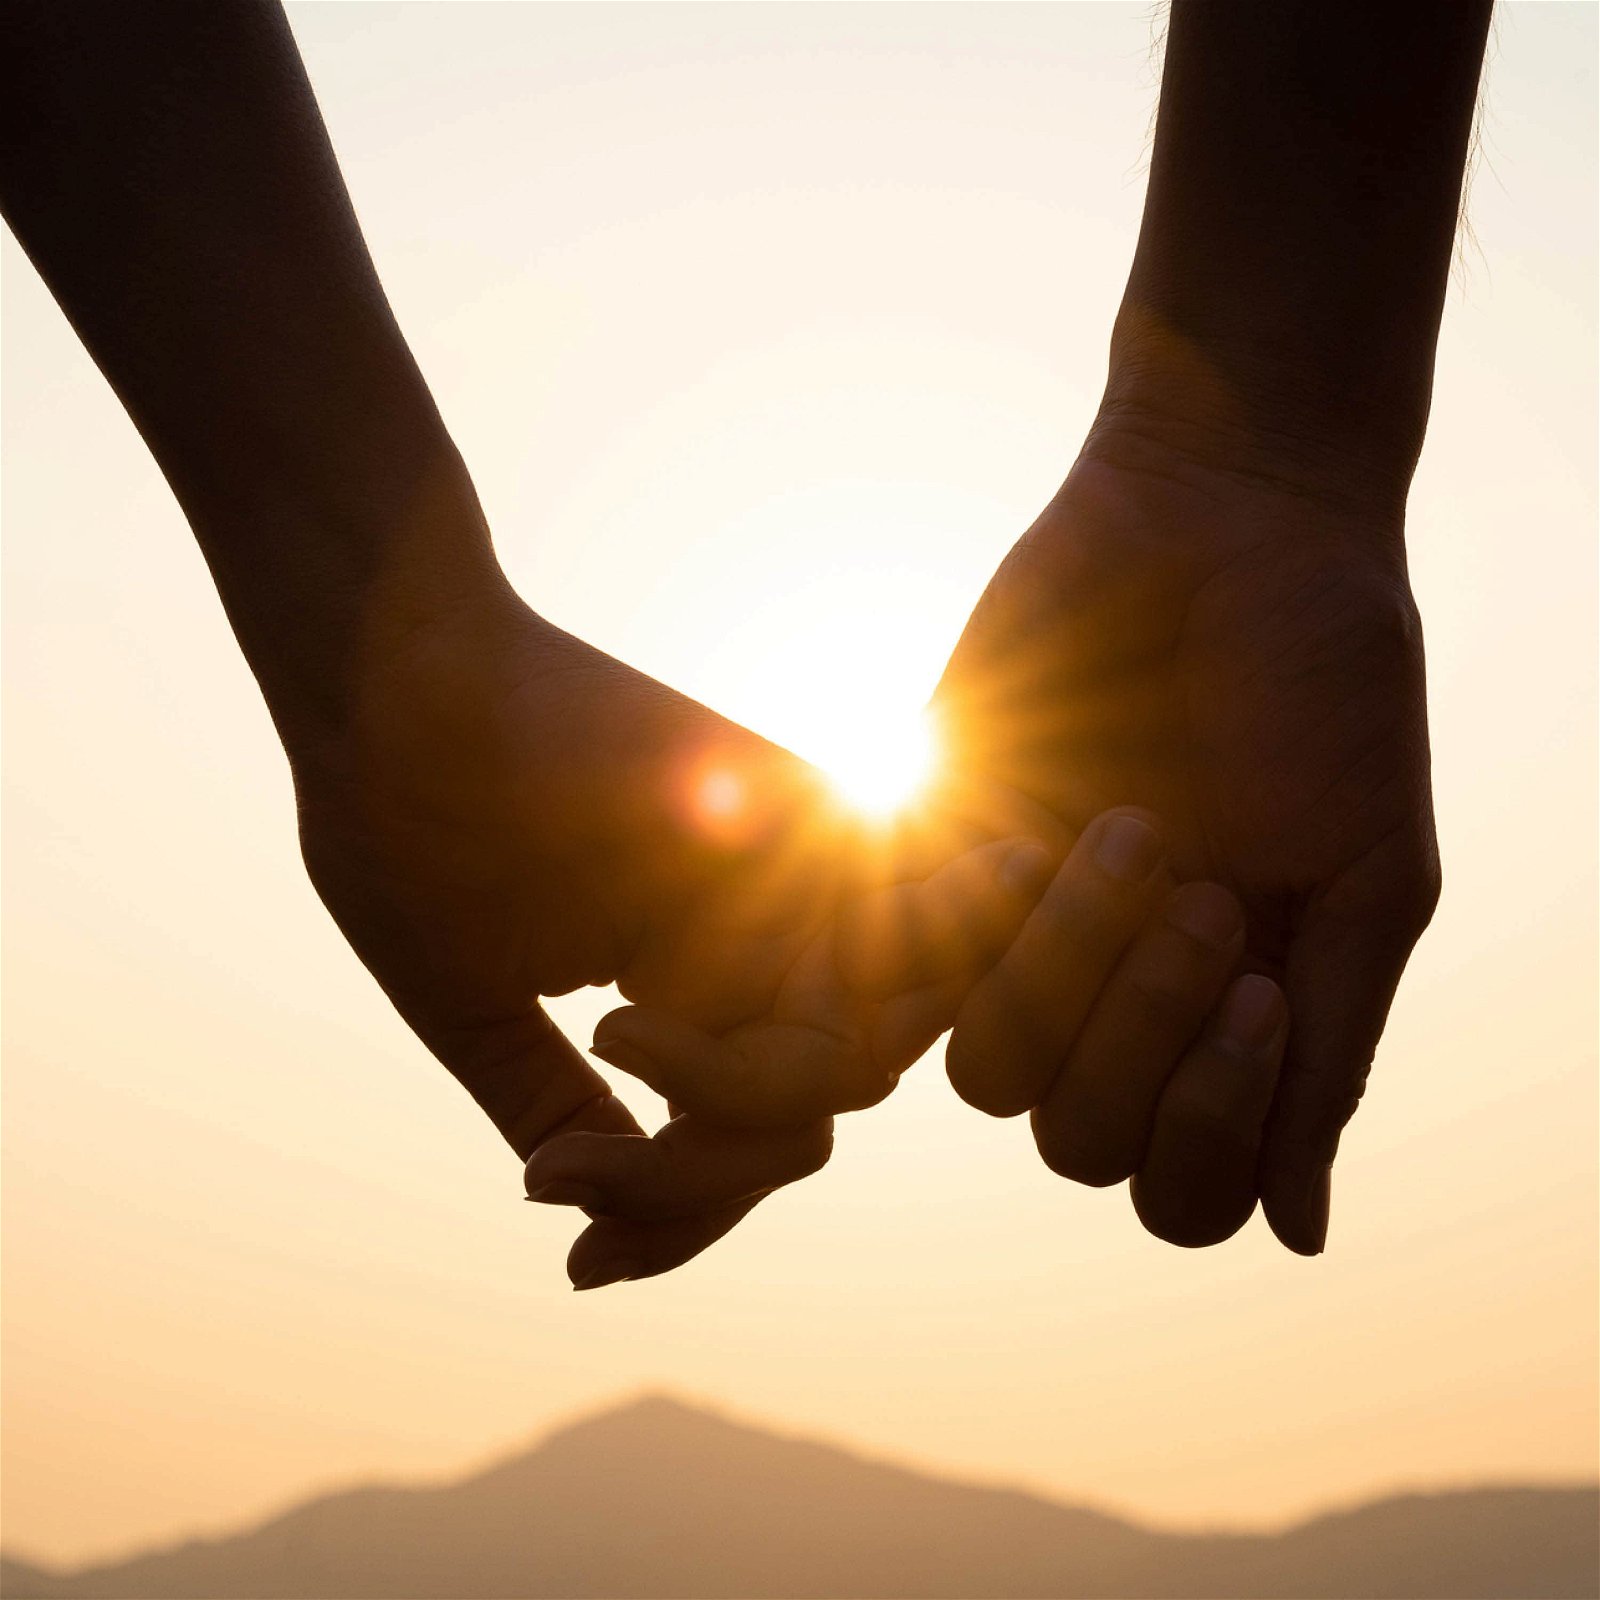 153. Growing Together: 3 Ways to Strengthen Your Relationship